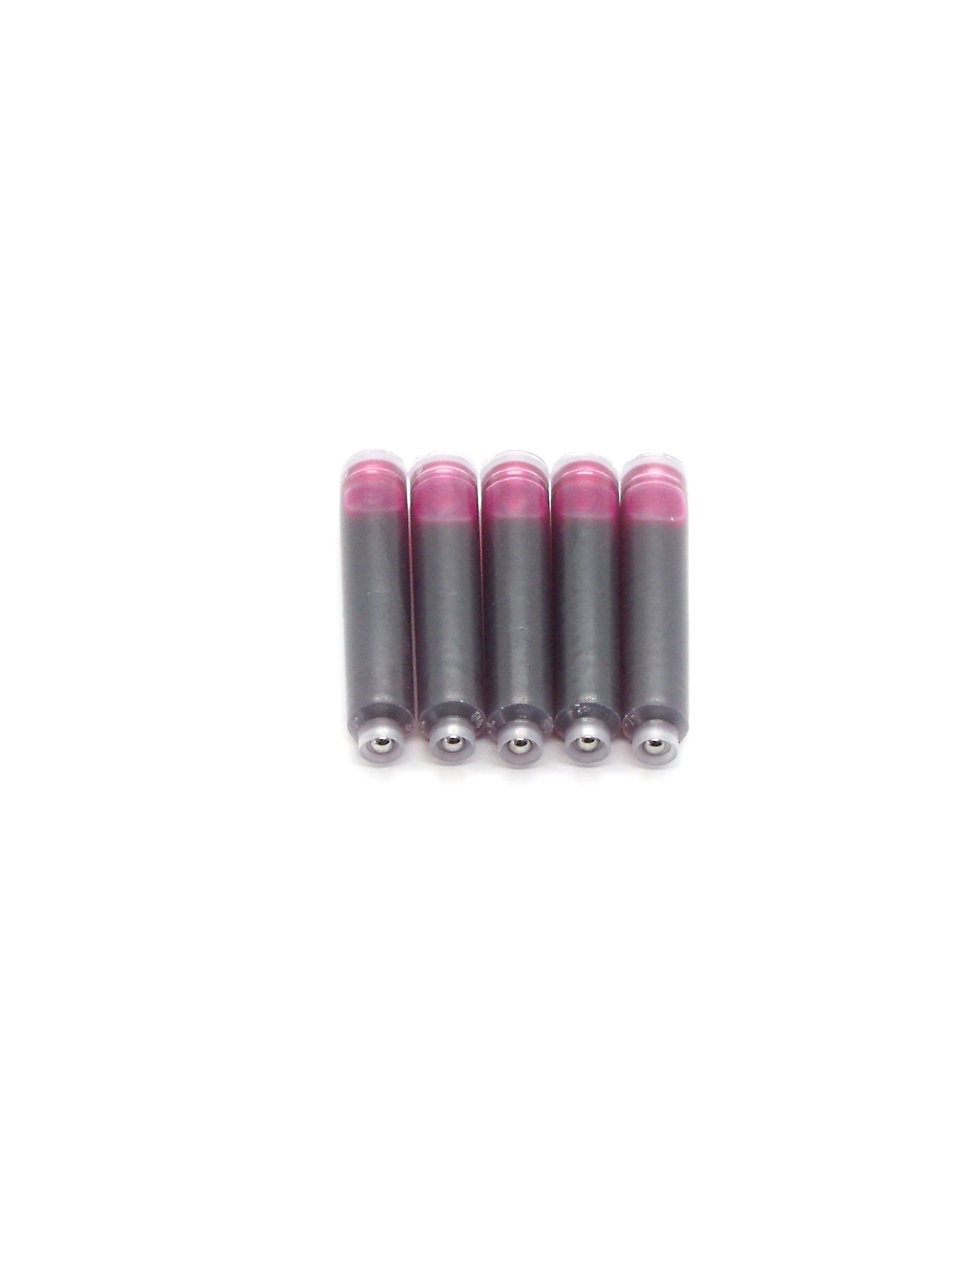 Top Ink Cartridges For Ohto Fountain Pens (Pink)